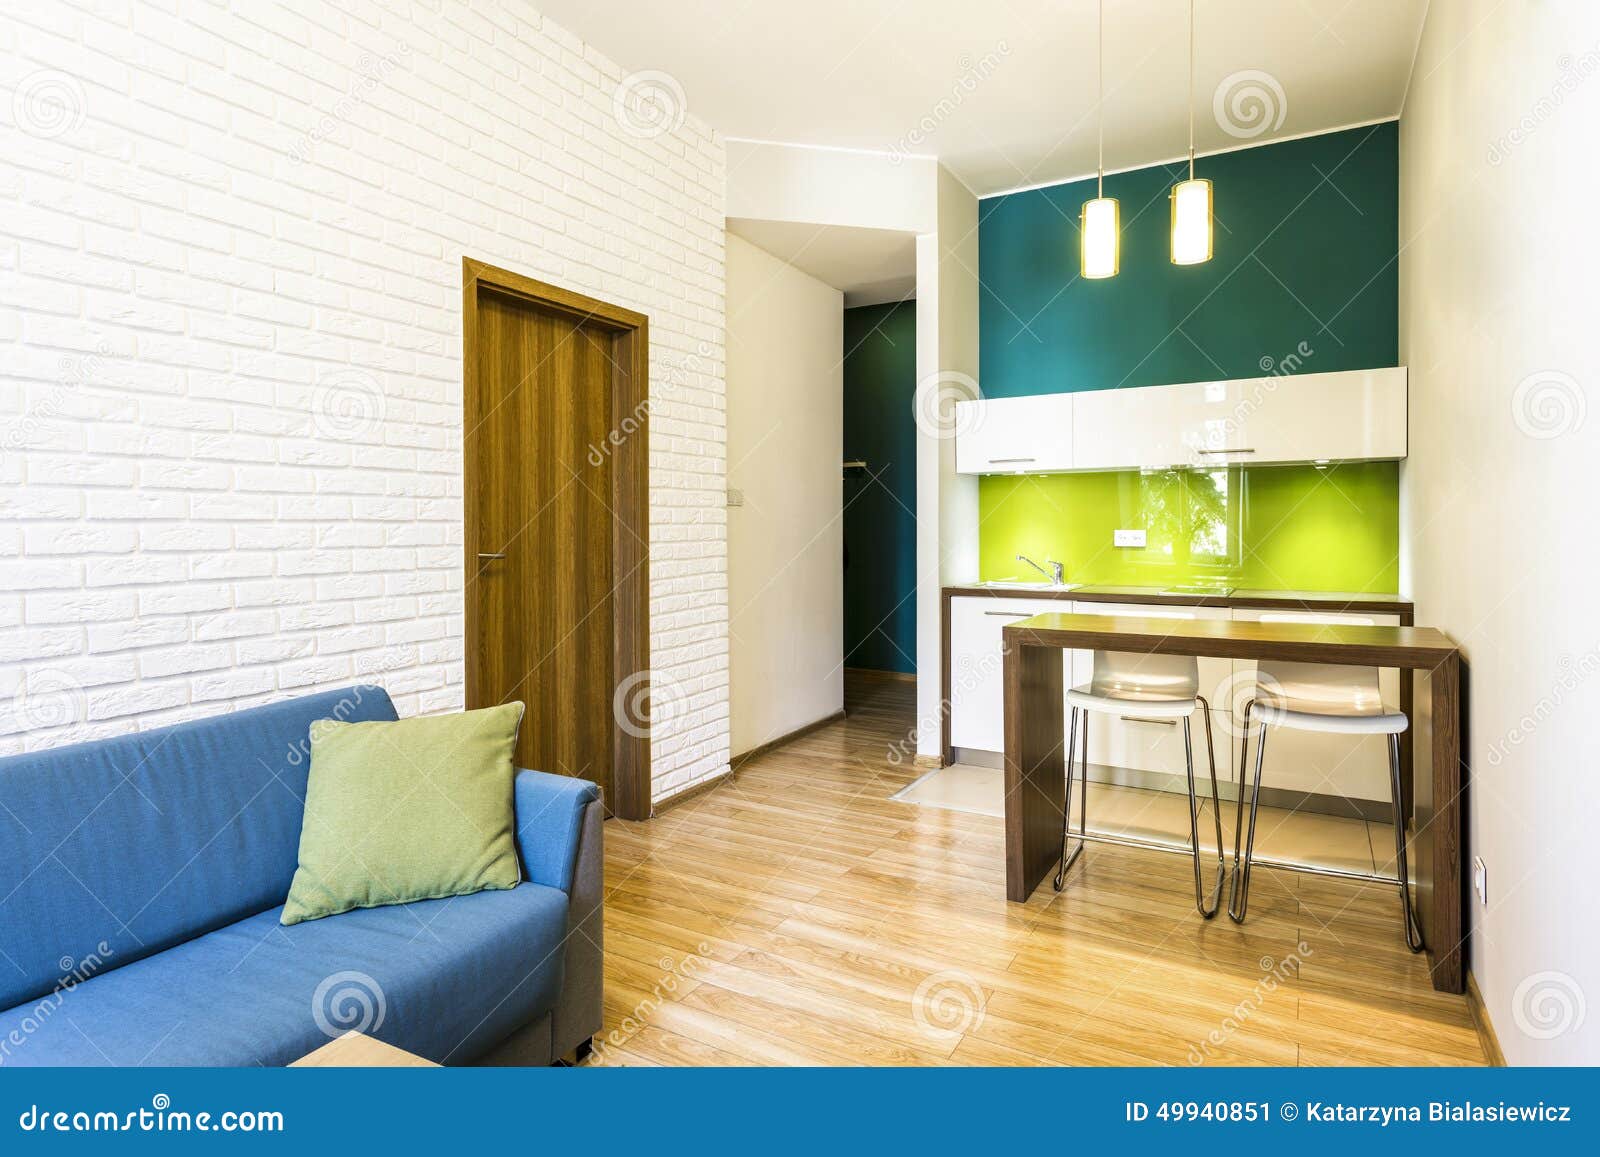 small living room with green kitchenette